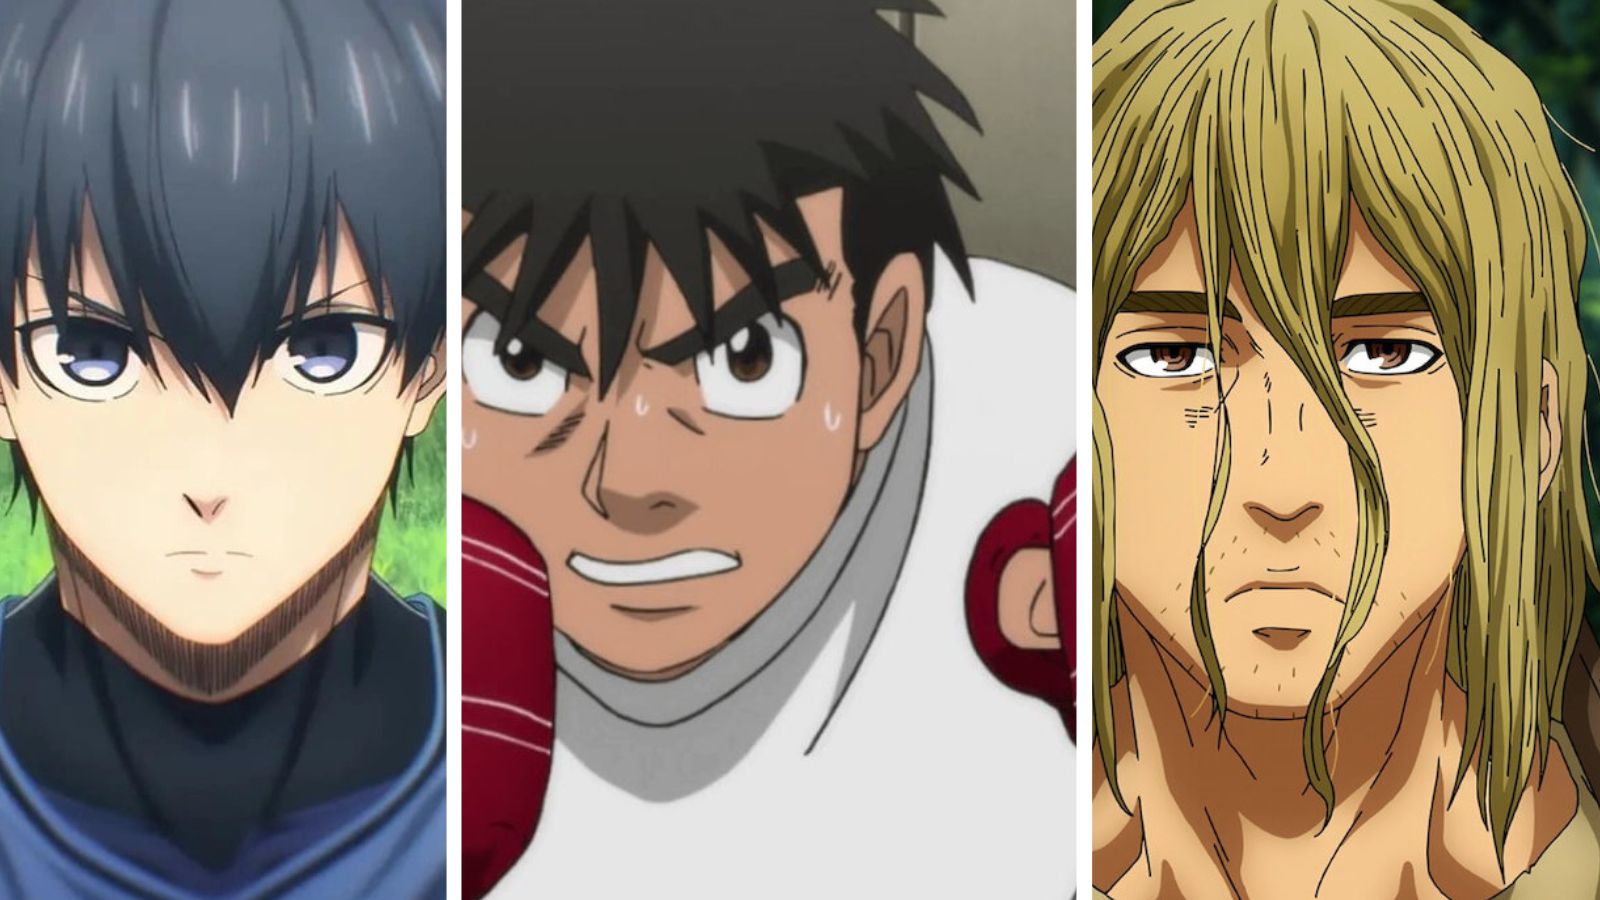 Every Major Shonen Protagonist's Special Attacks Ranked